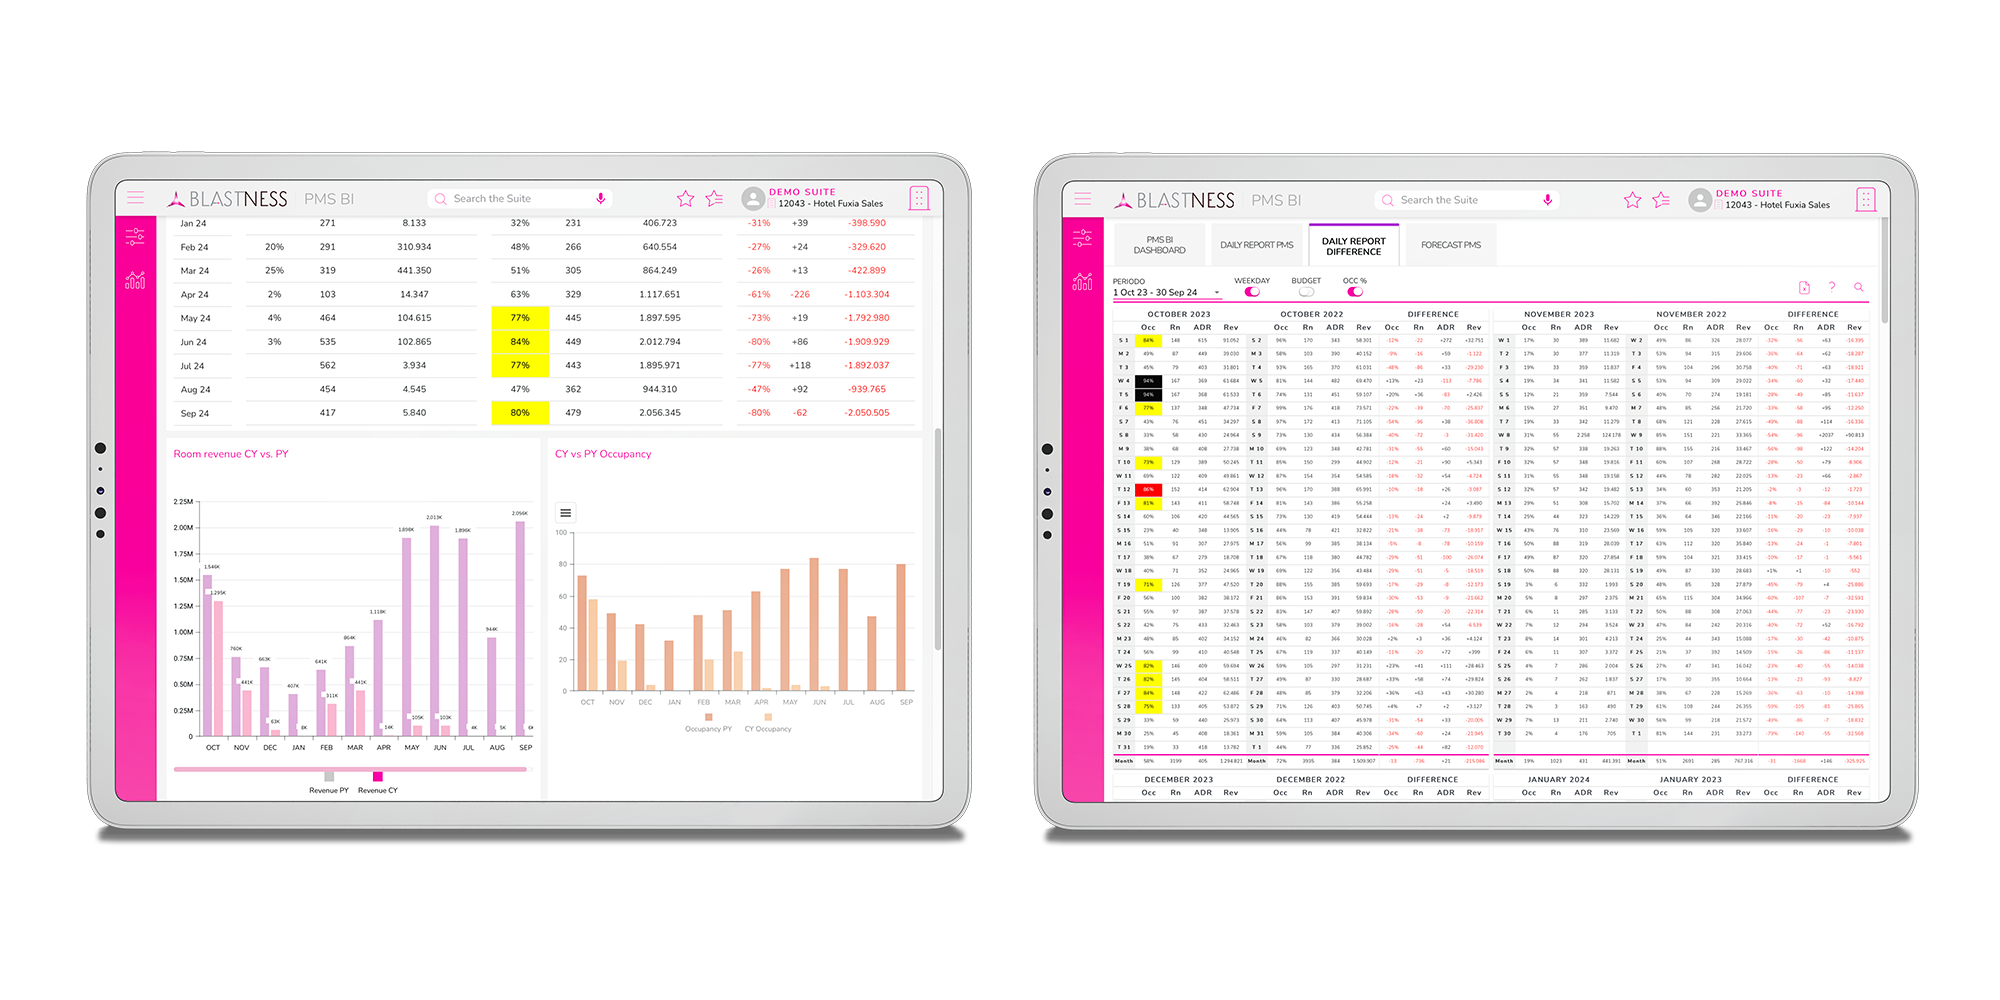 Quality data, reports and insights to monitor and improve your performance 2